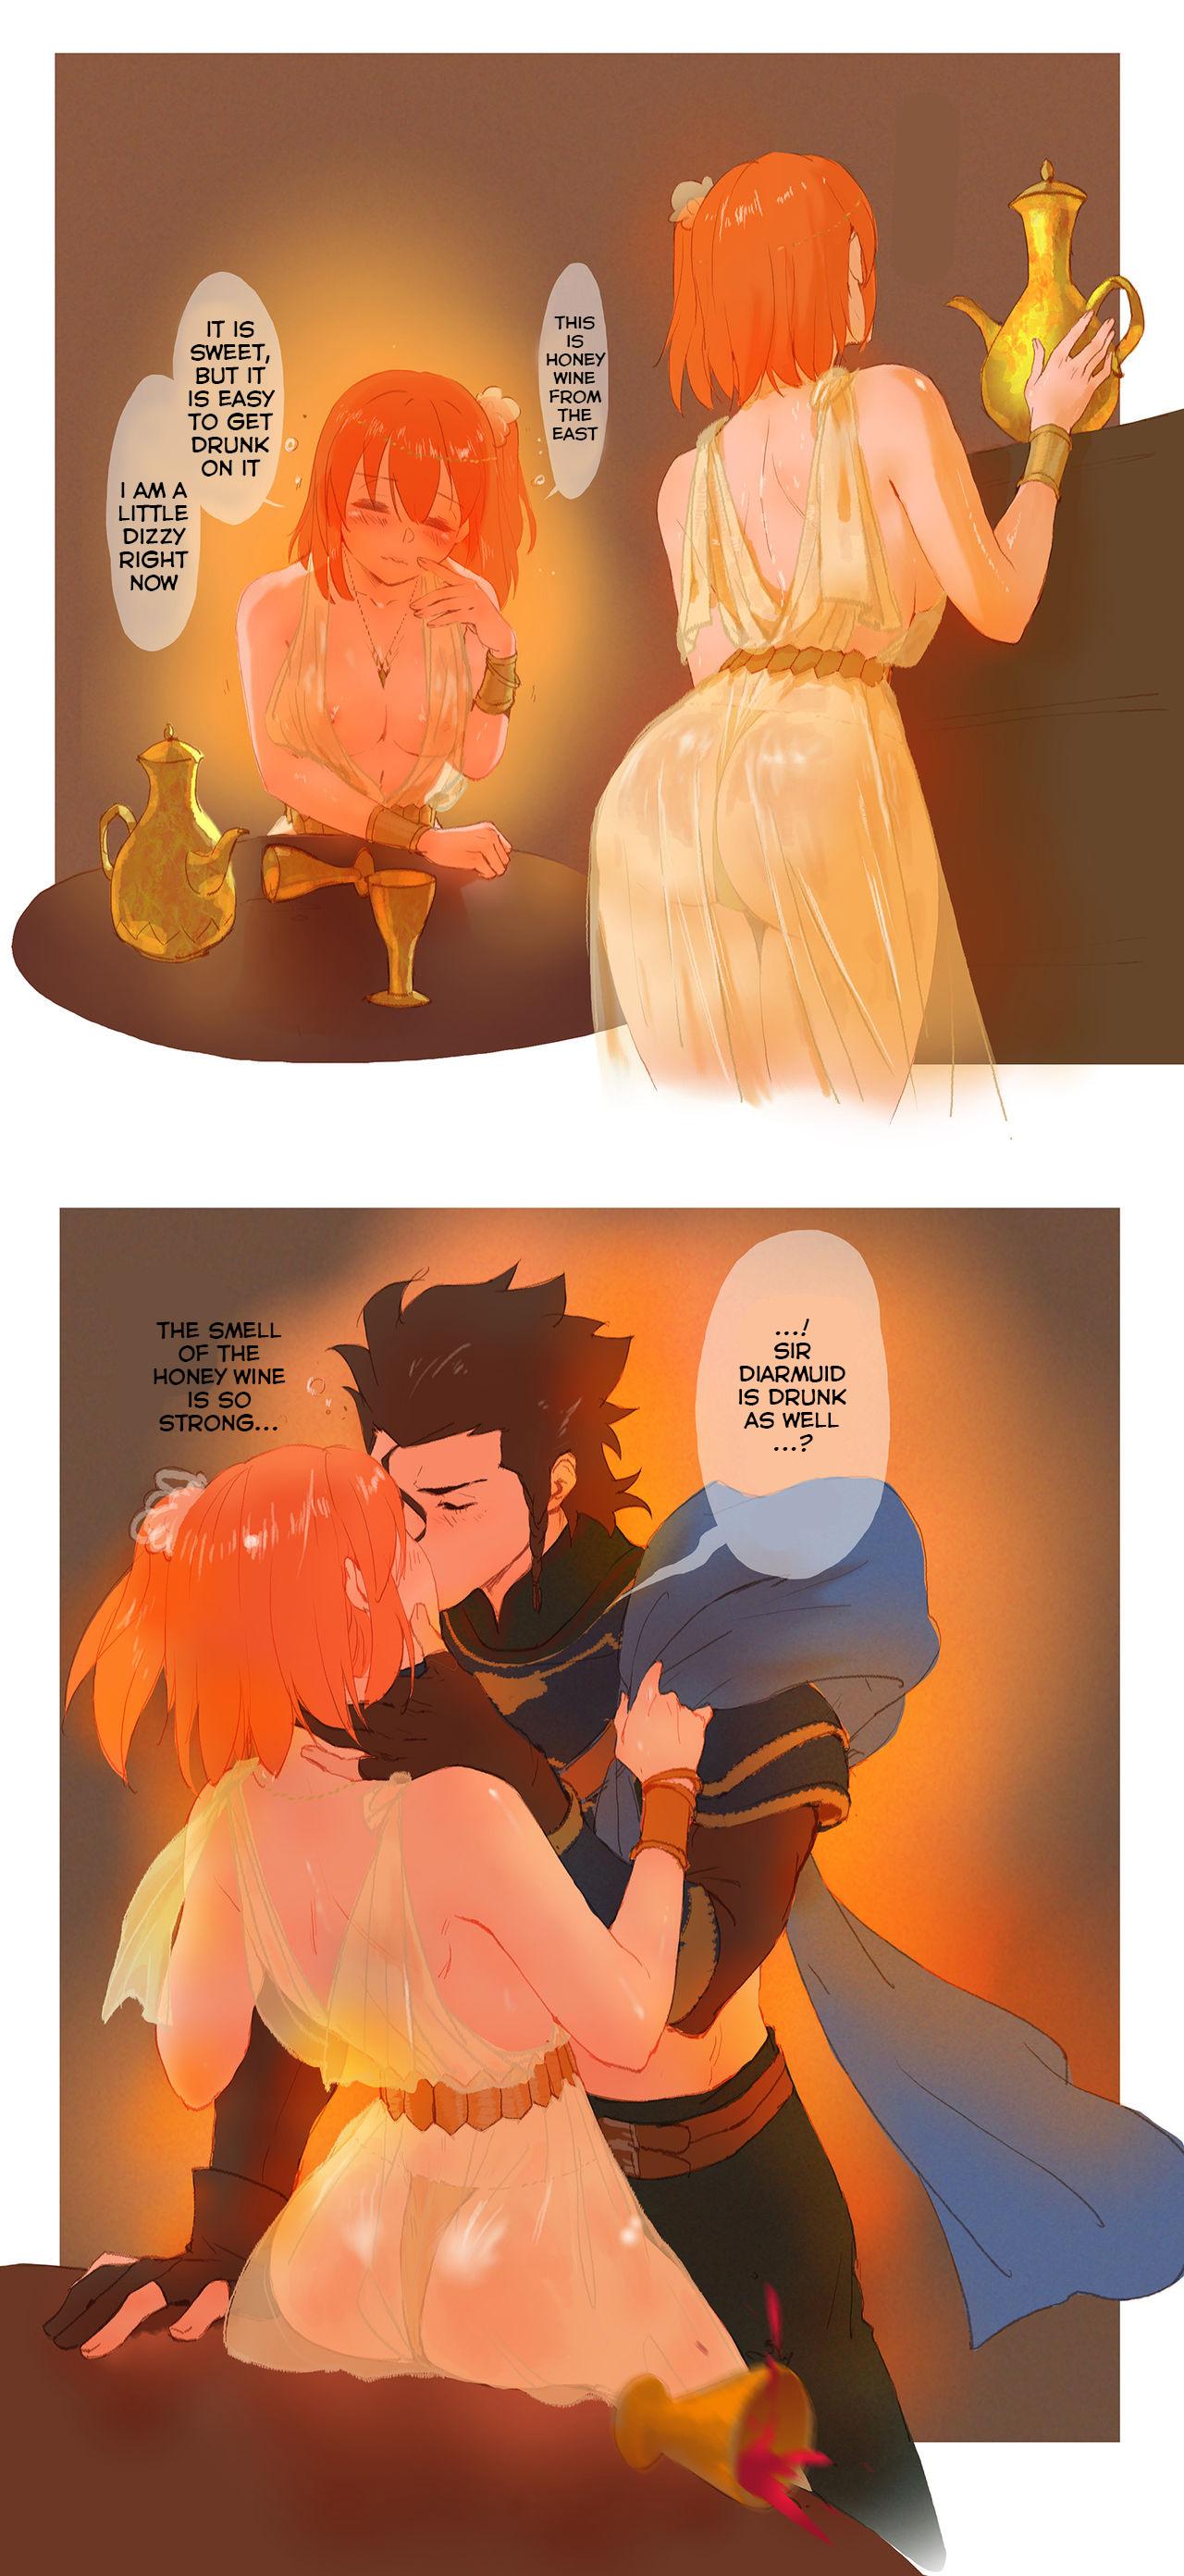 Private Sex Princess and Warrior - Fate grand order Tanned - Page 4